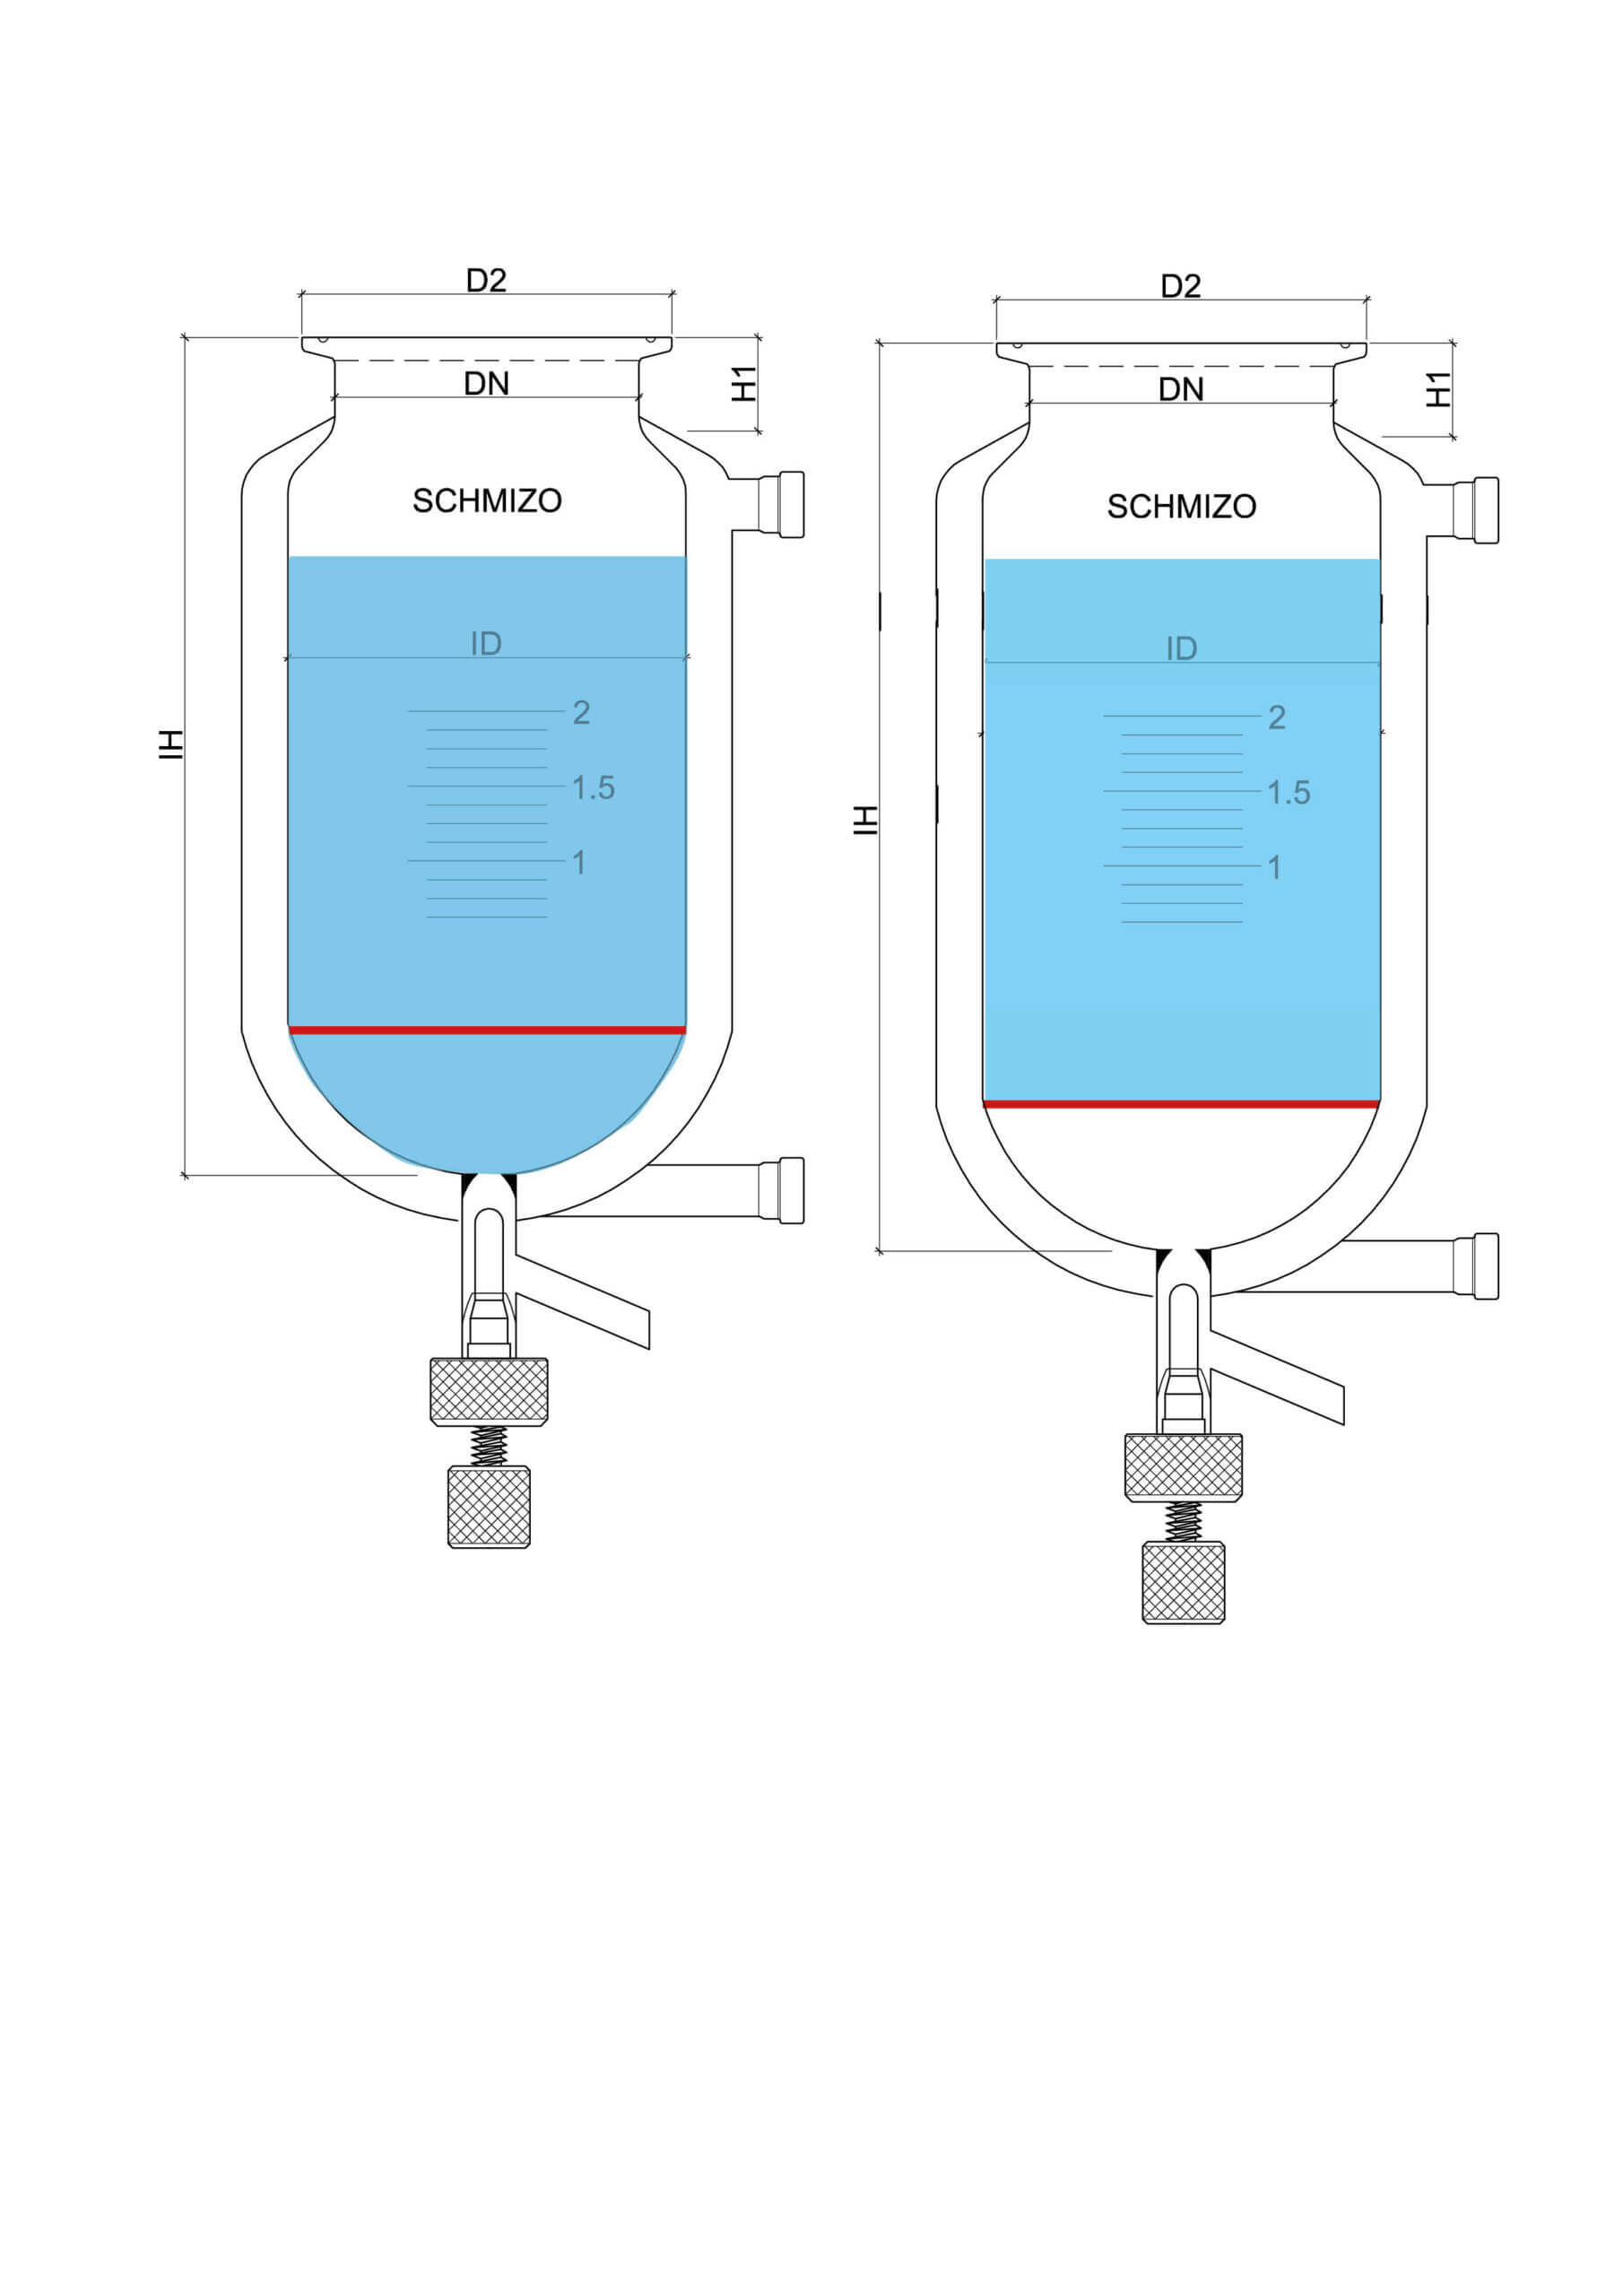 Option 1 (left): Volume measured to the bottom of the reactor. Option 2 (right): Volume measured up to to the filter plate.